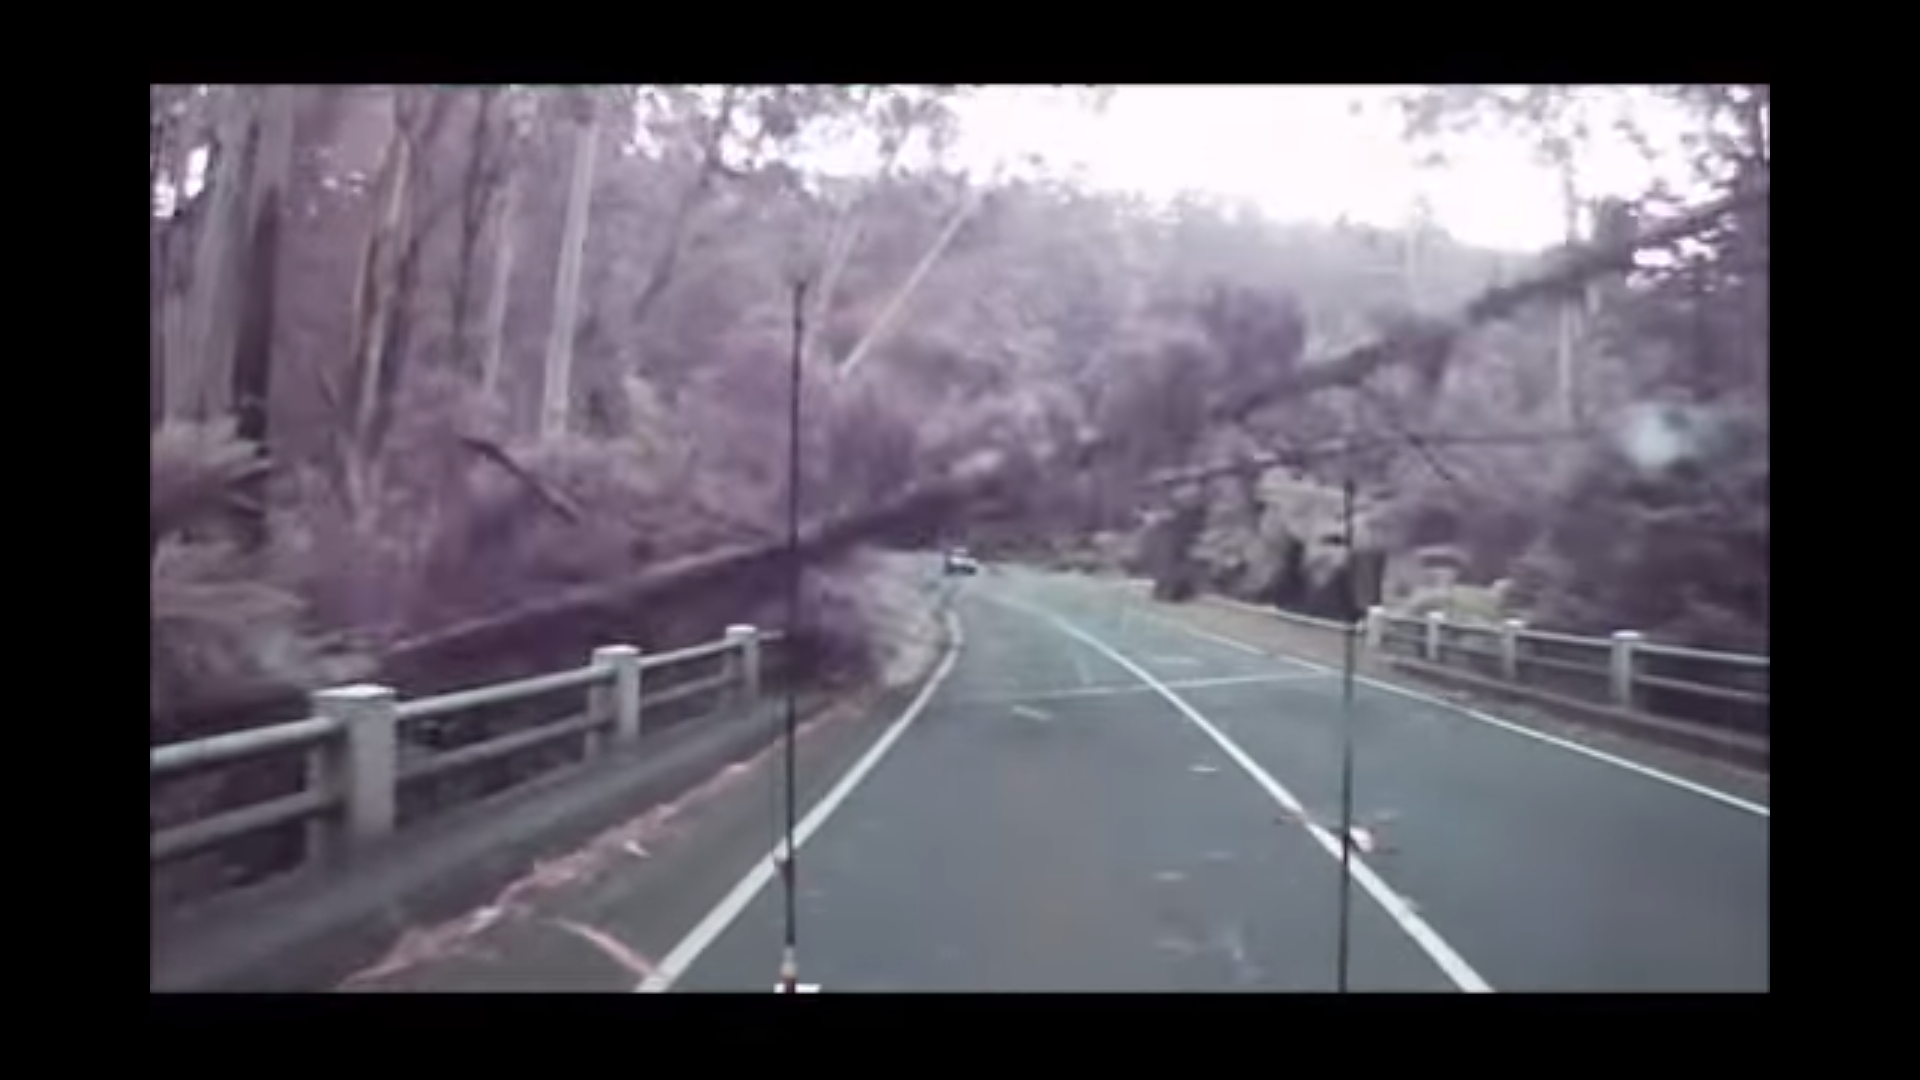 The tree violently smashes into the road due to the high Australian winds